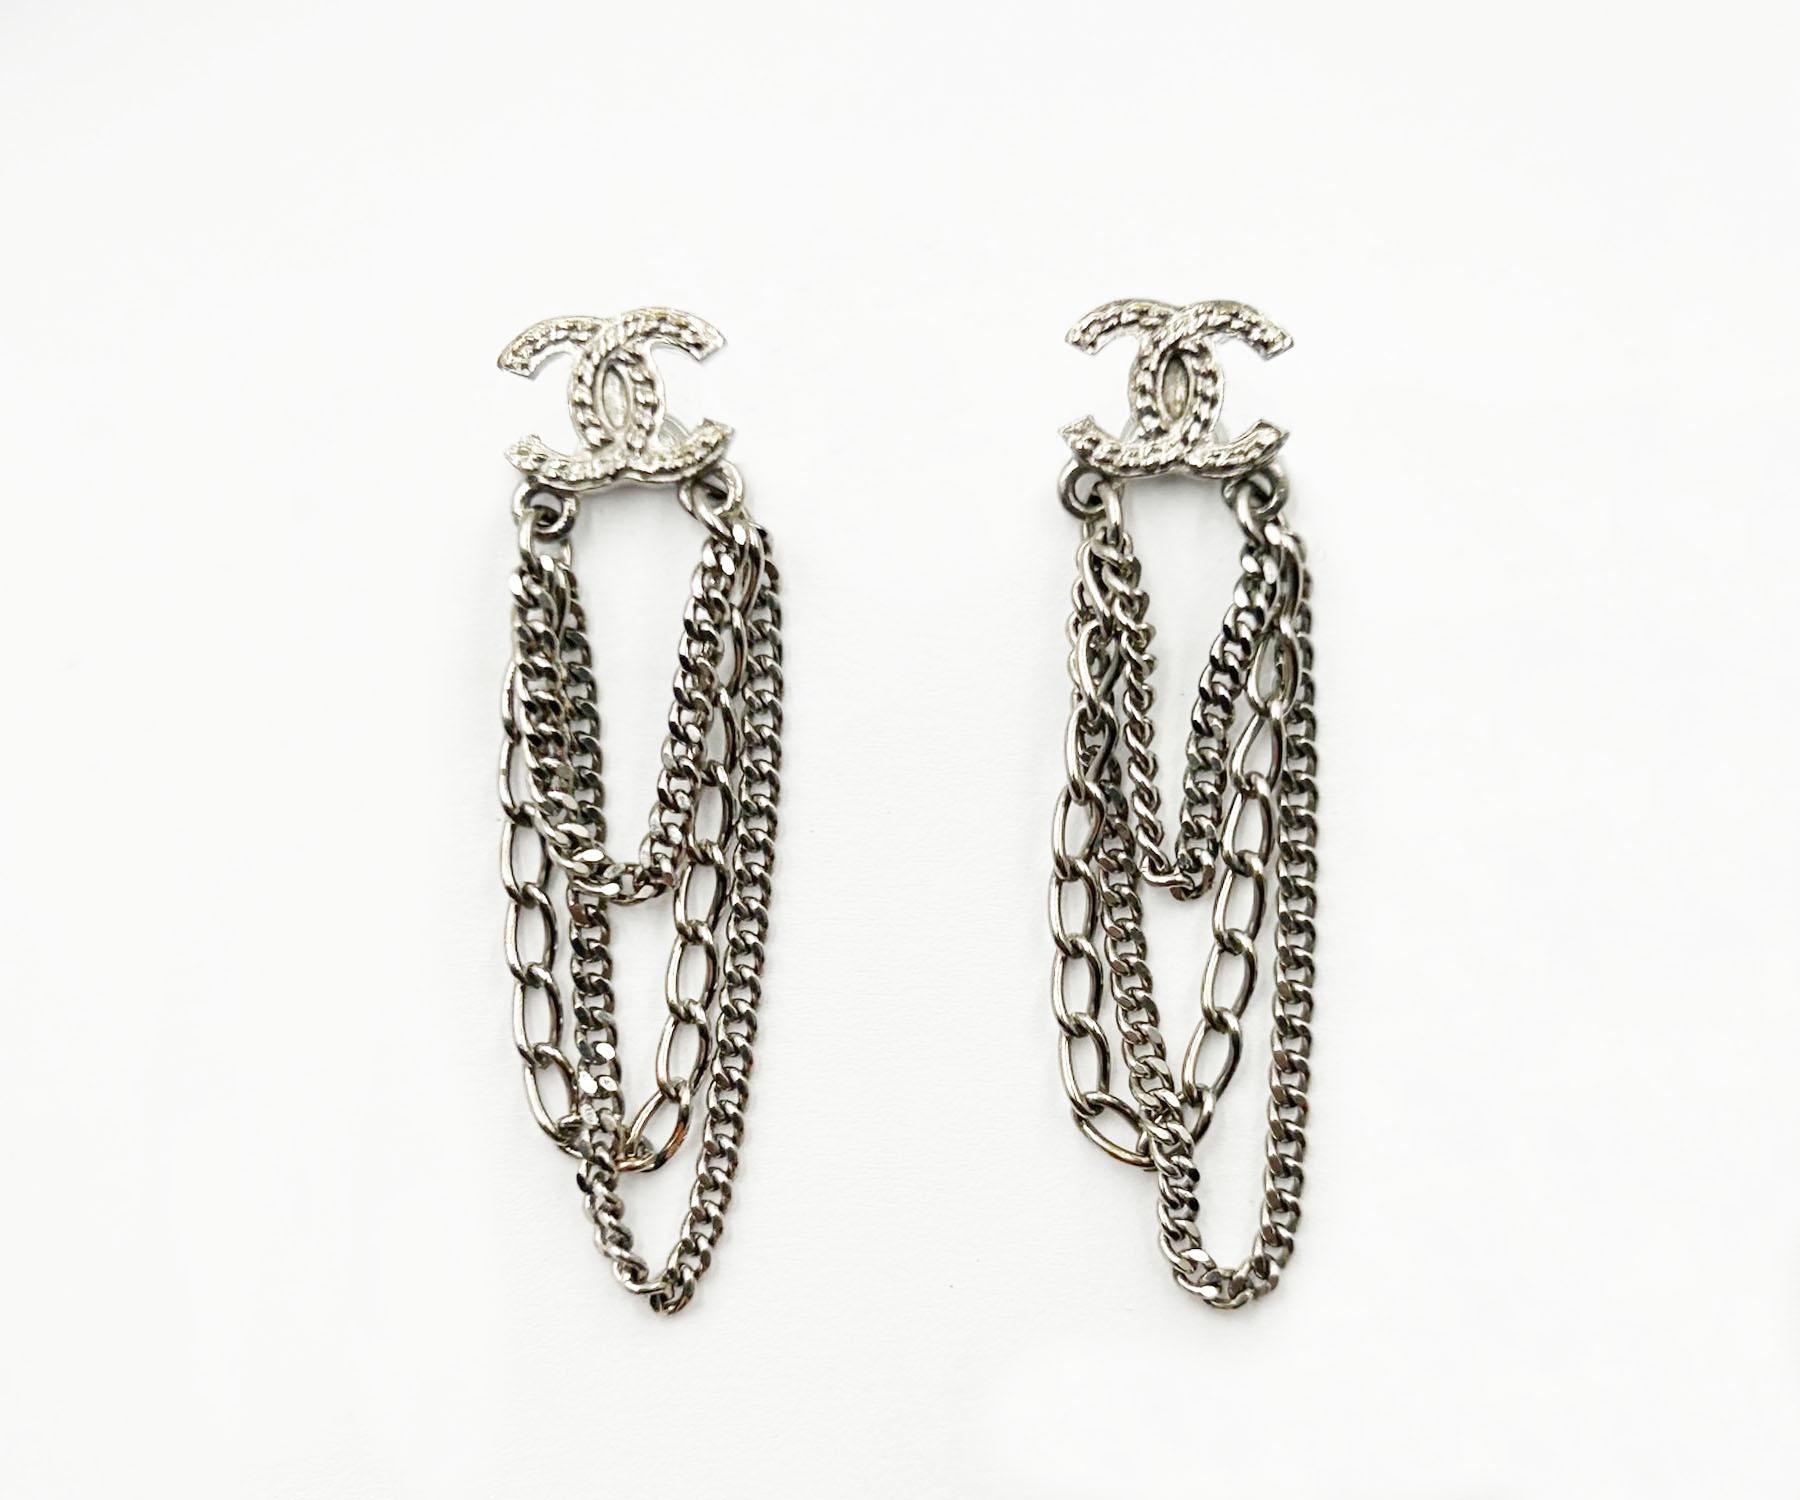 Chanel Silver CC Multi Chain Dangle Piercing Earrings

*Marked 09
*Made in France
*Comes with the original box

-It is approximately 1.9